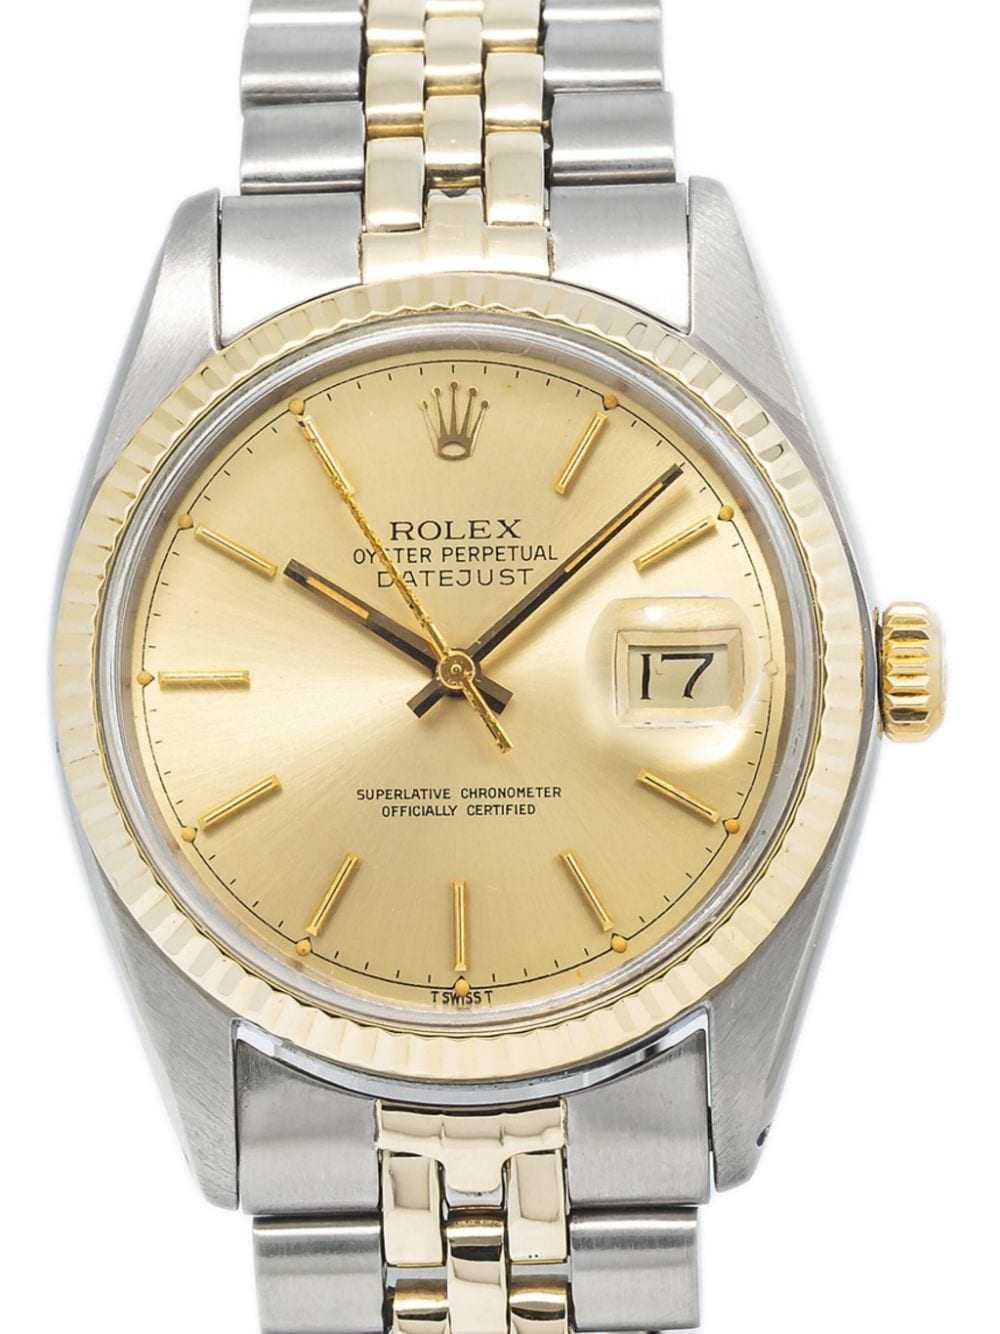 Rolex pre-owned Datejust 36mm - Gold - image 2